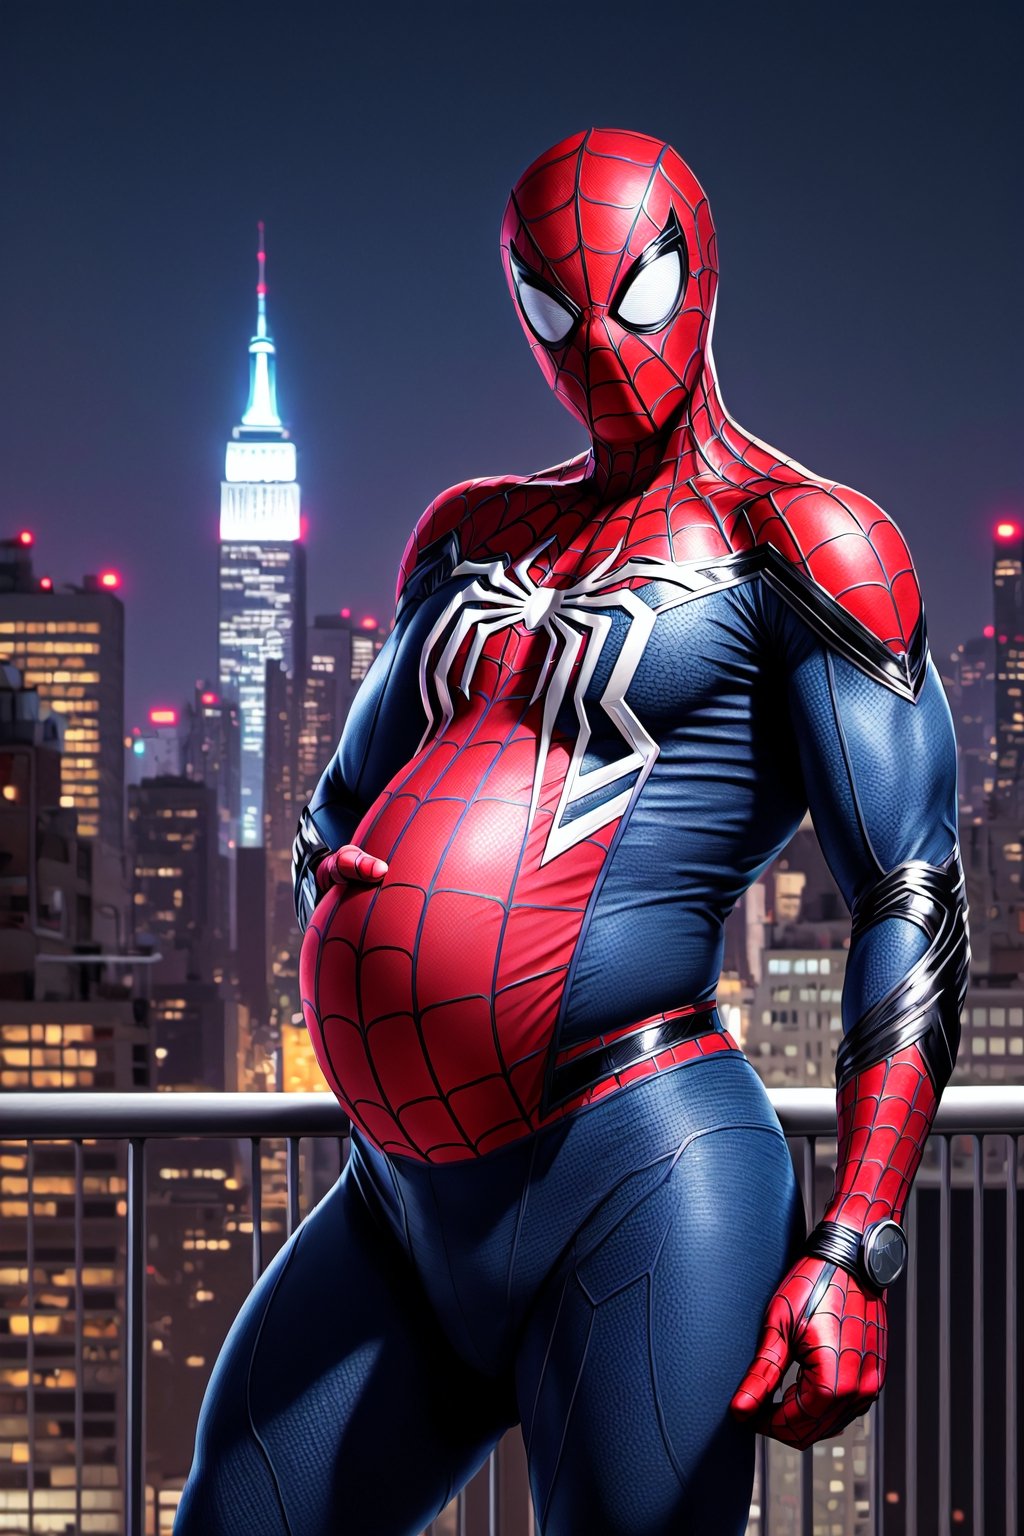 Spider-Man, Spider-Man, Male, 1boy, Age: 25 years Height: Medium (about 1.75 meters). outdoors, standing, on_rooftop, new_york_skyline, skyline_background, midnight, nighttime , provacative_pose, sexy, hyper_bulge, crotch_bulge,man_boobs, manboobs, mobs,spider-man costume, Spider-Man_suit, masked, mask_on, faceless, man_boobs, moobs, manboobs, round_belly, large_belly, belly_inflation, muscle_gut, big_belly, round_belly, looks_pregnant, Mpreg,male_pregnant, very_pregnant, pregnant_belly,  knocked_up, gravid, hyper_belly, gut, belly, overweight_male,superchub, clothed, 